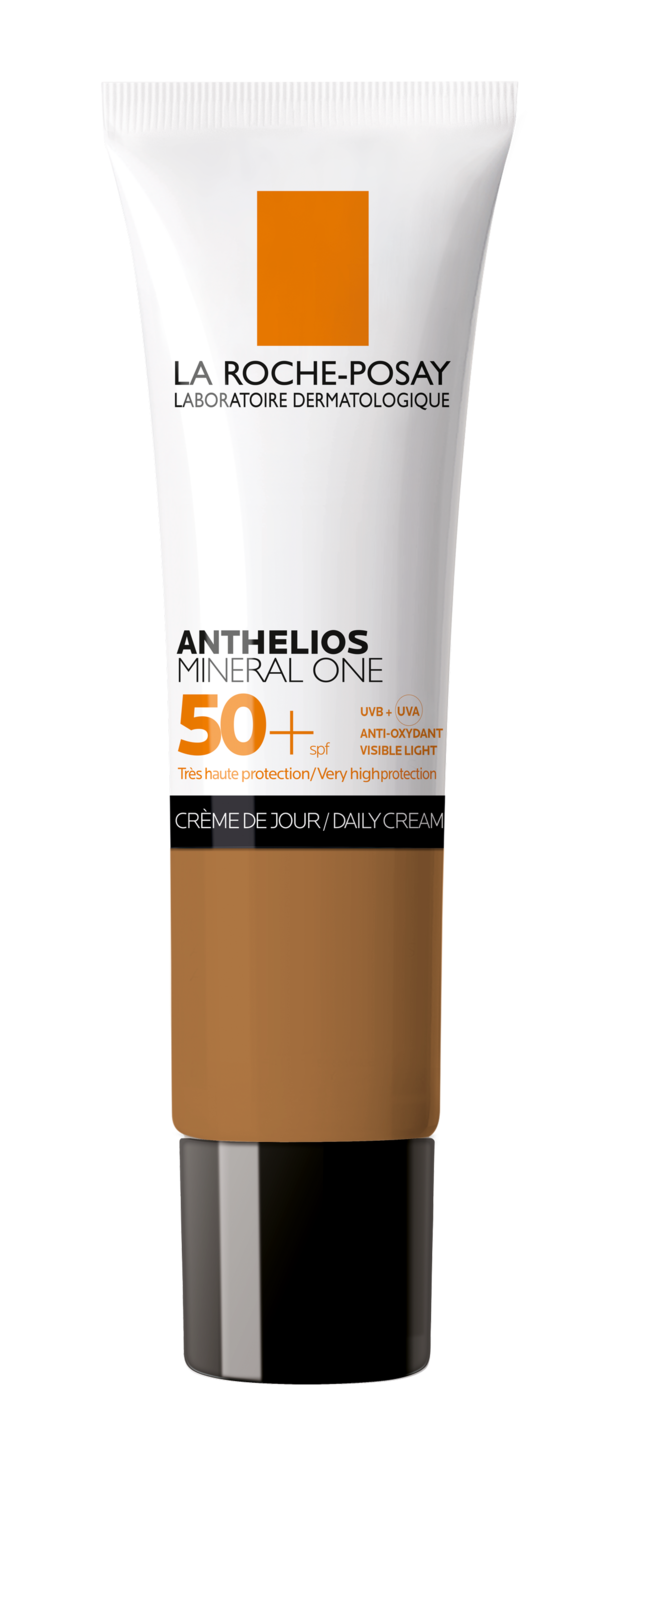 Image of La Roche-Posay Anthelios Mineral One SPF50 - Kleur 05 